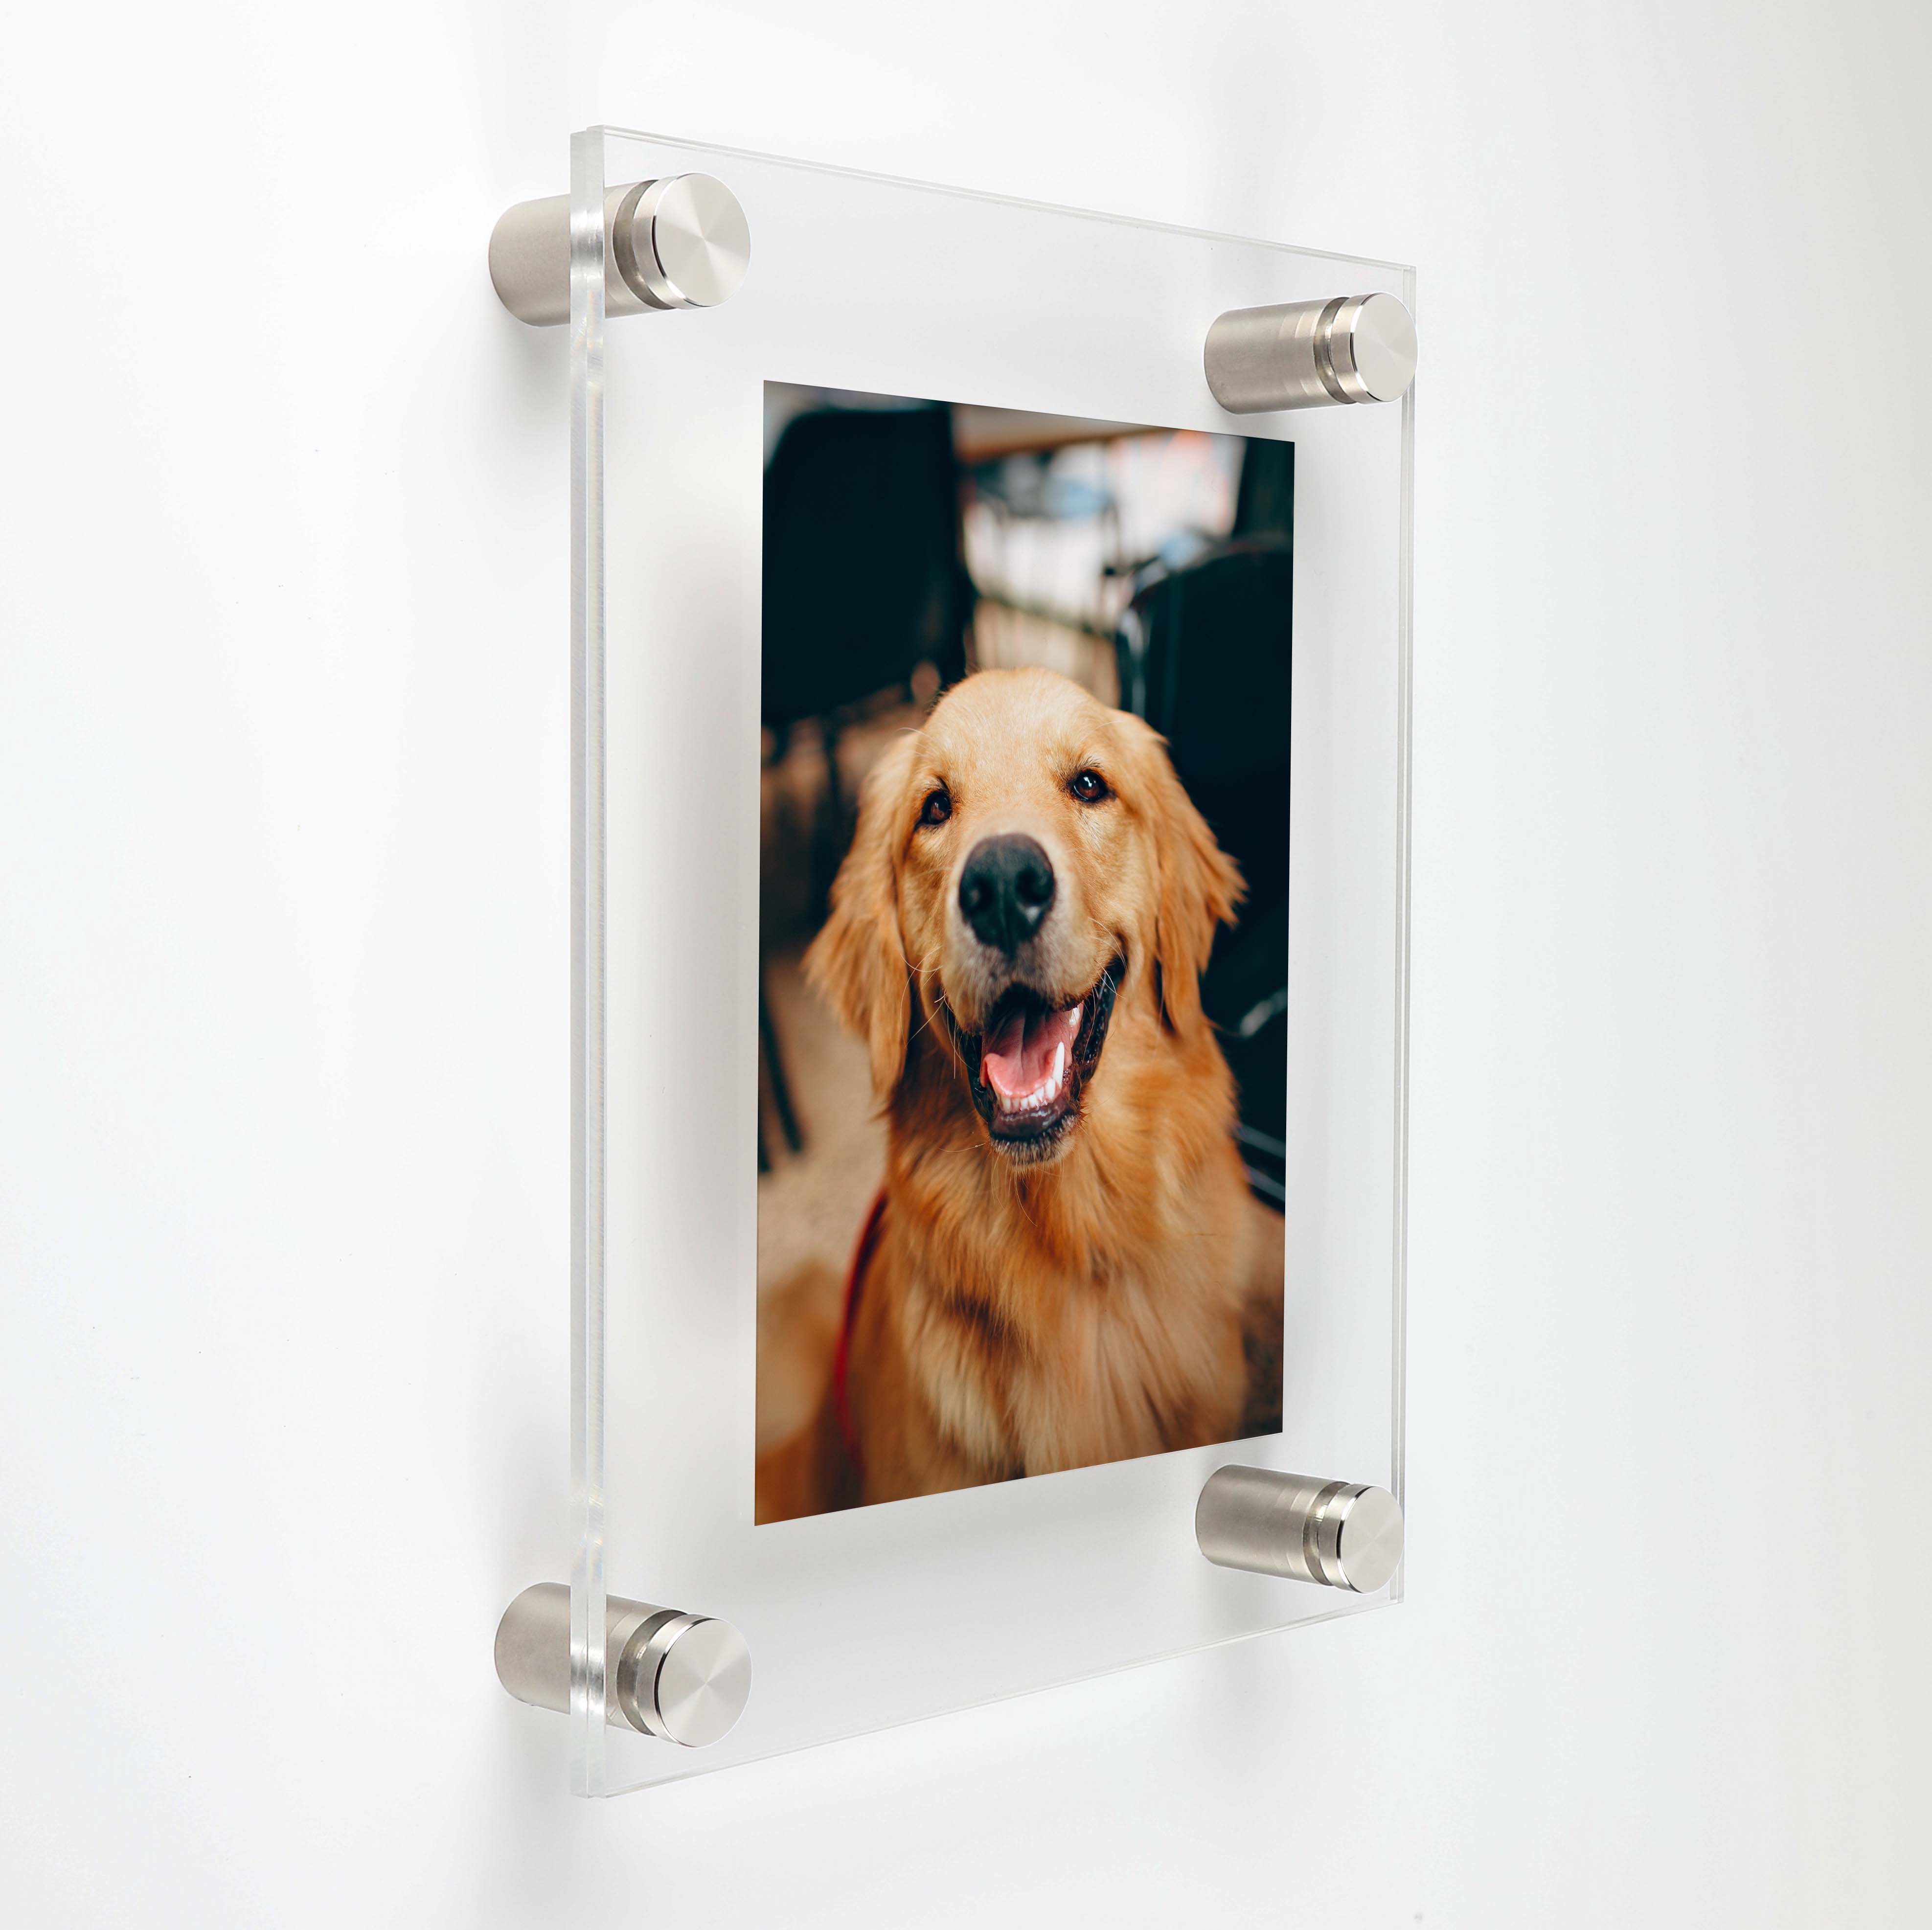 (2) 19-3/4'' x 26'' Clear Acrylics , Pre-Drilled With Polished Edges (Thick 3/16'' each), Wall Frame with (4) 3/4'' x 3/4'' Brushed Stainless Steel Standoffs includes Screws and Anchors